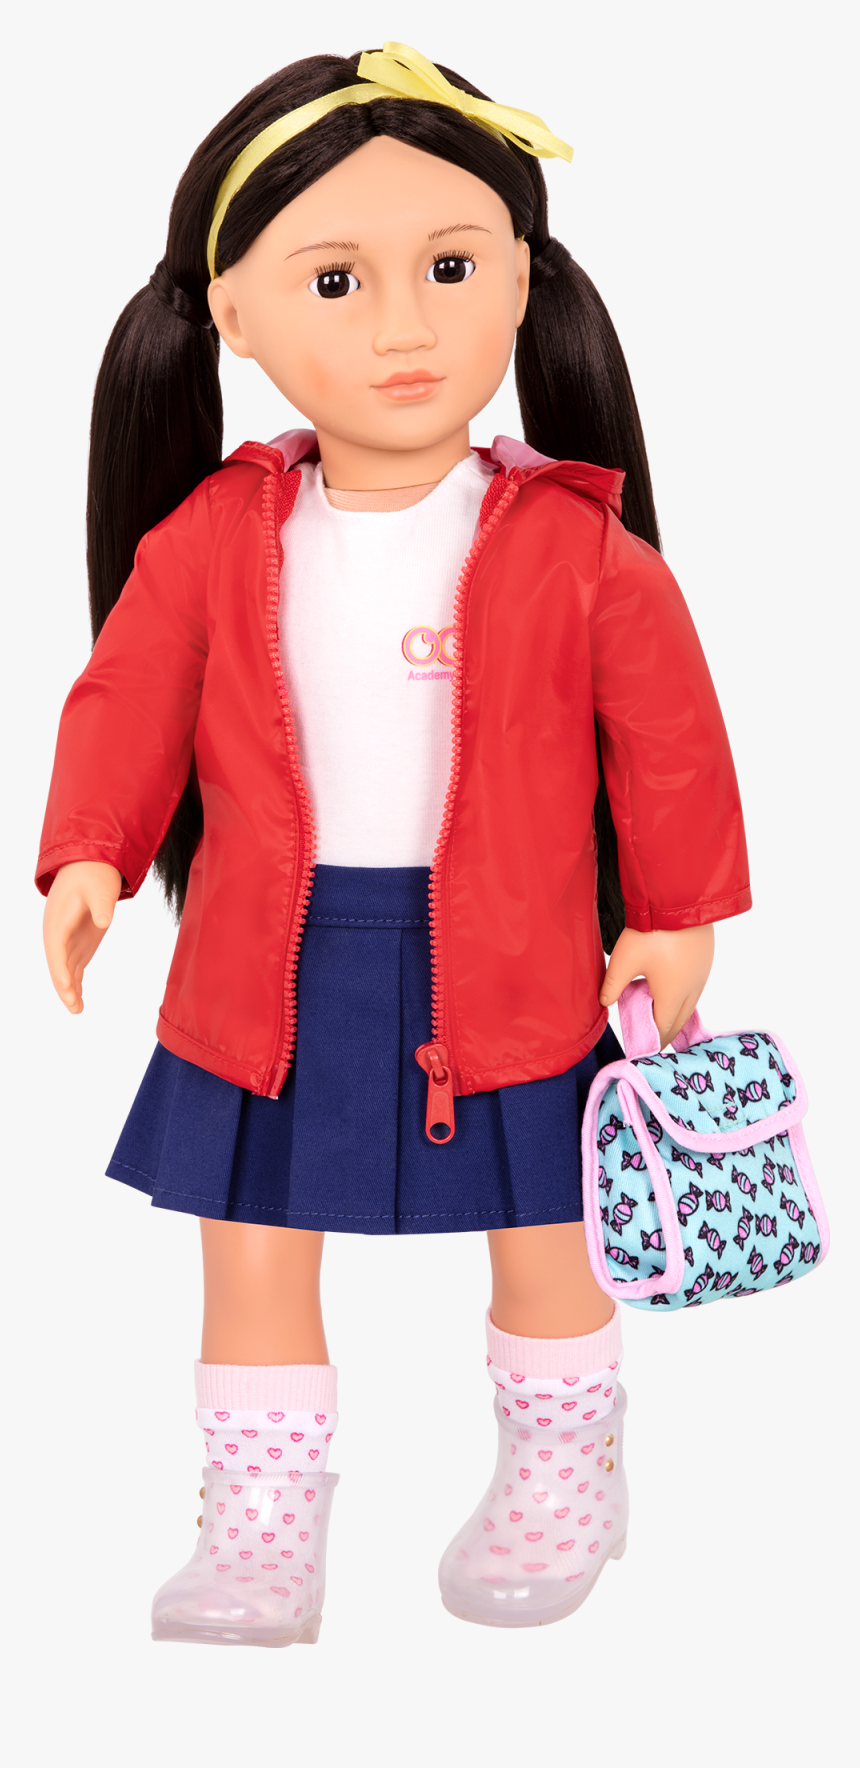 Aiko Wearing Rainy Recess School Outfit With Lunchbox - Doll, HD Png Download, Free Download